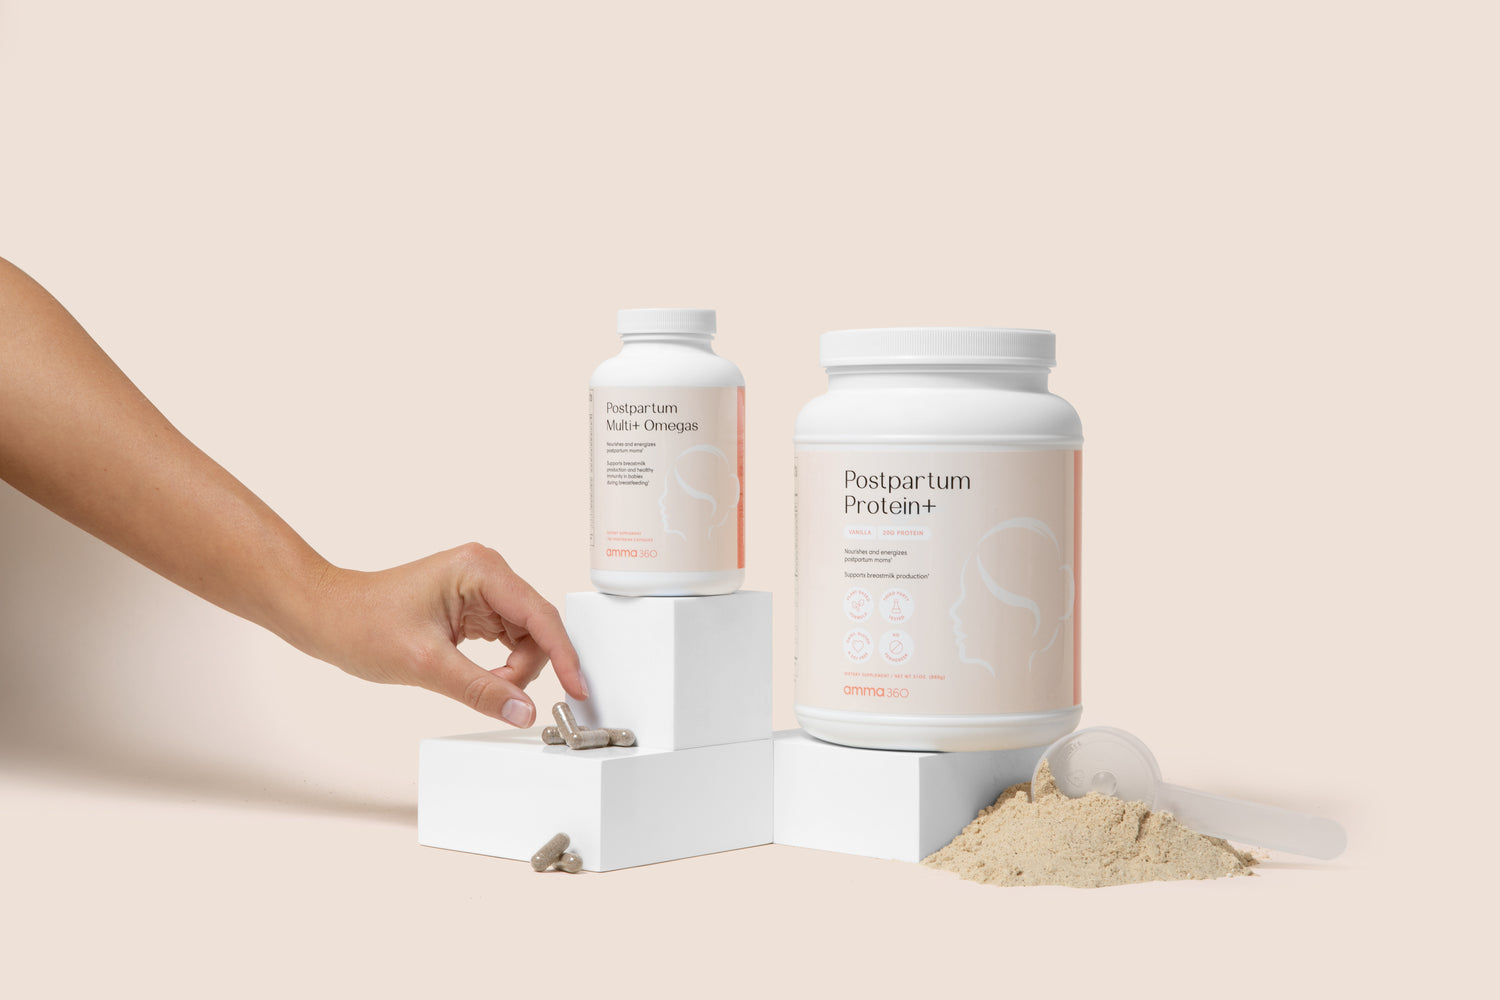 Postpartum product bundle image with hand reaching for capsule and protein powder